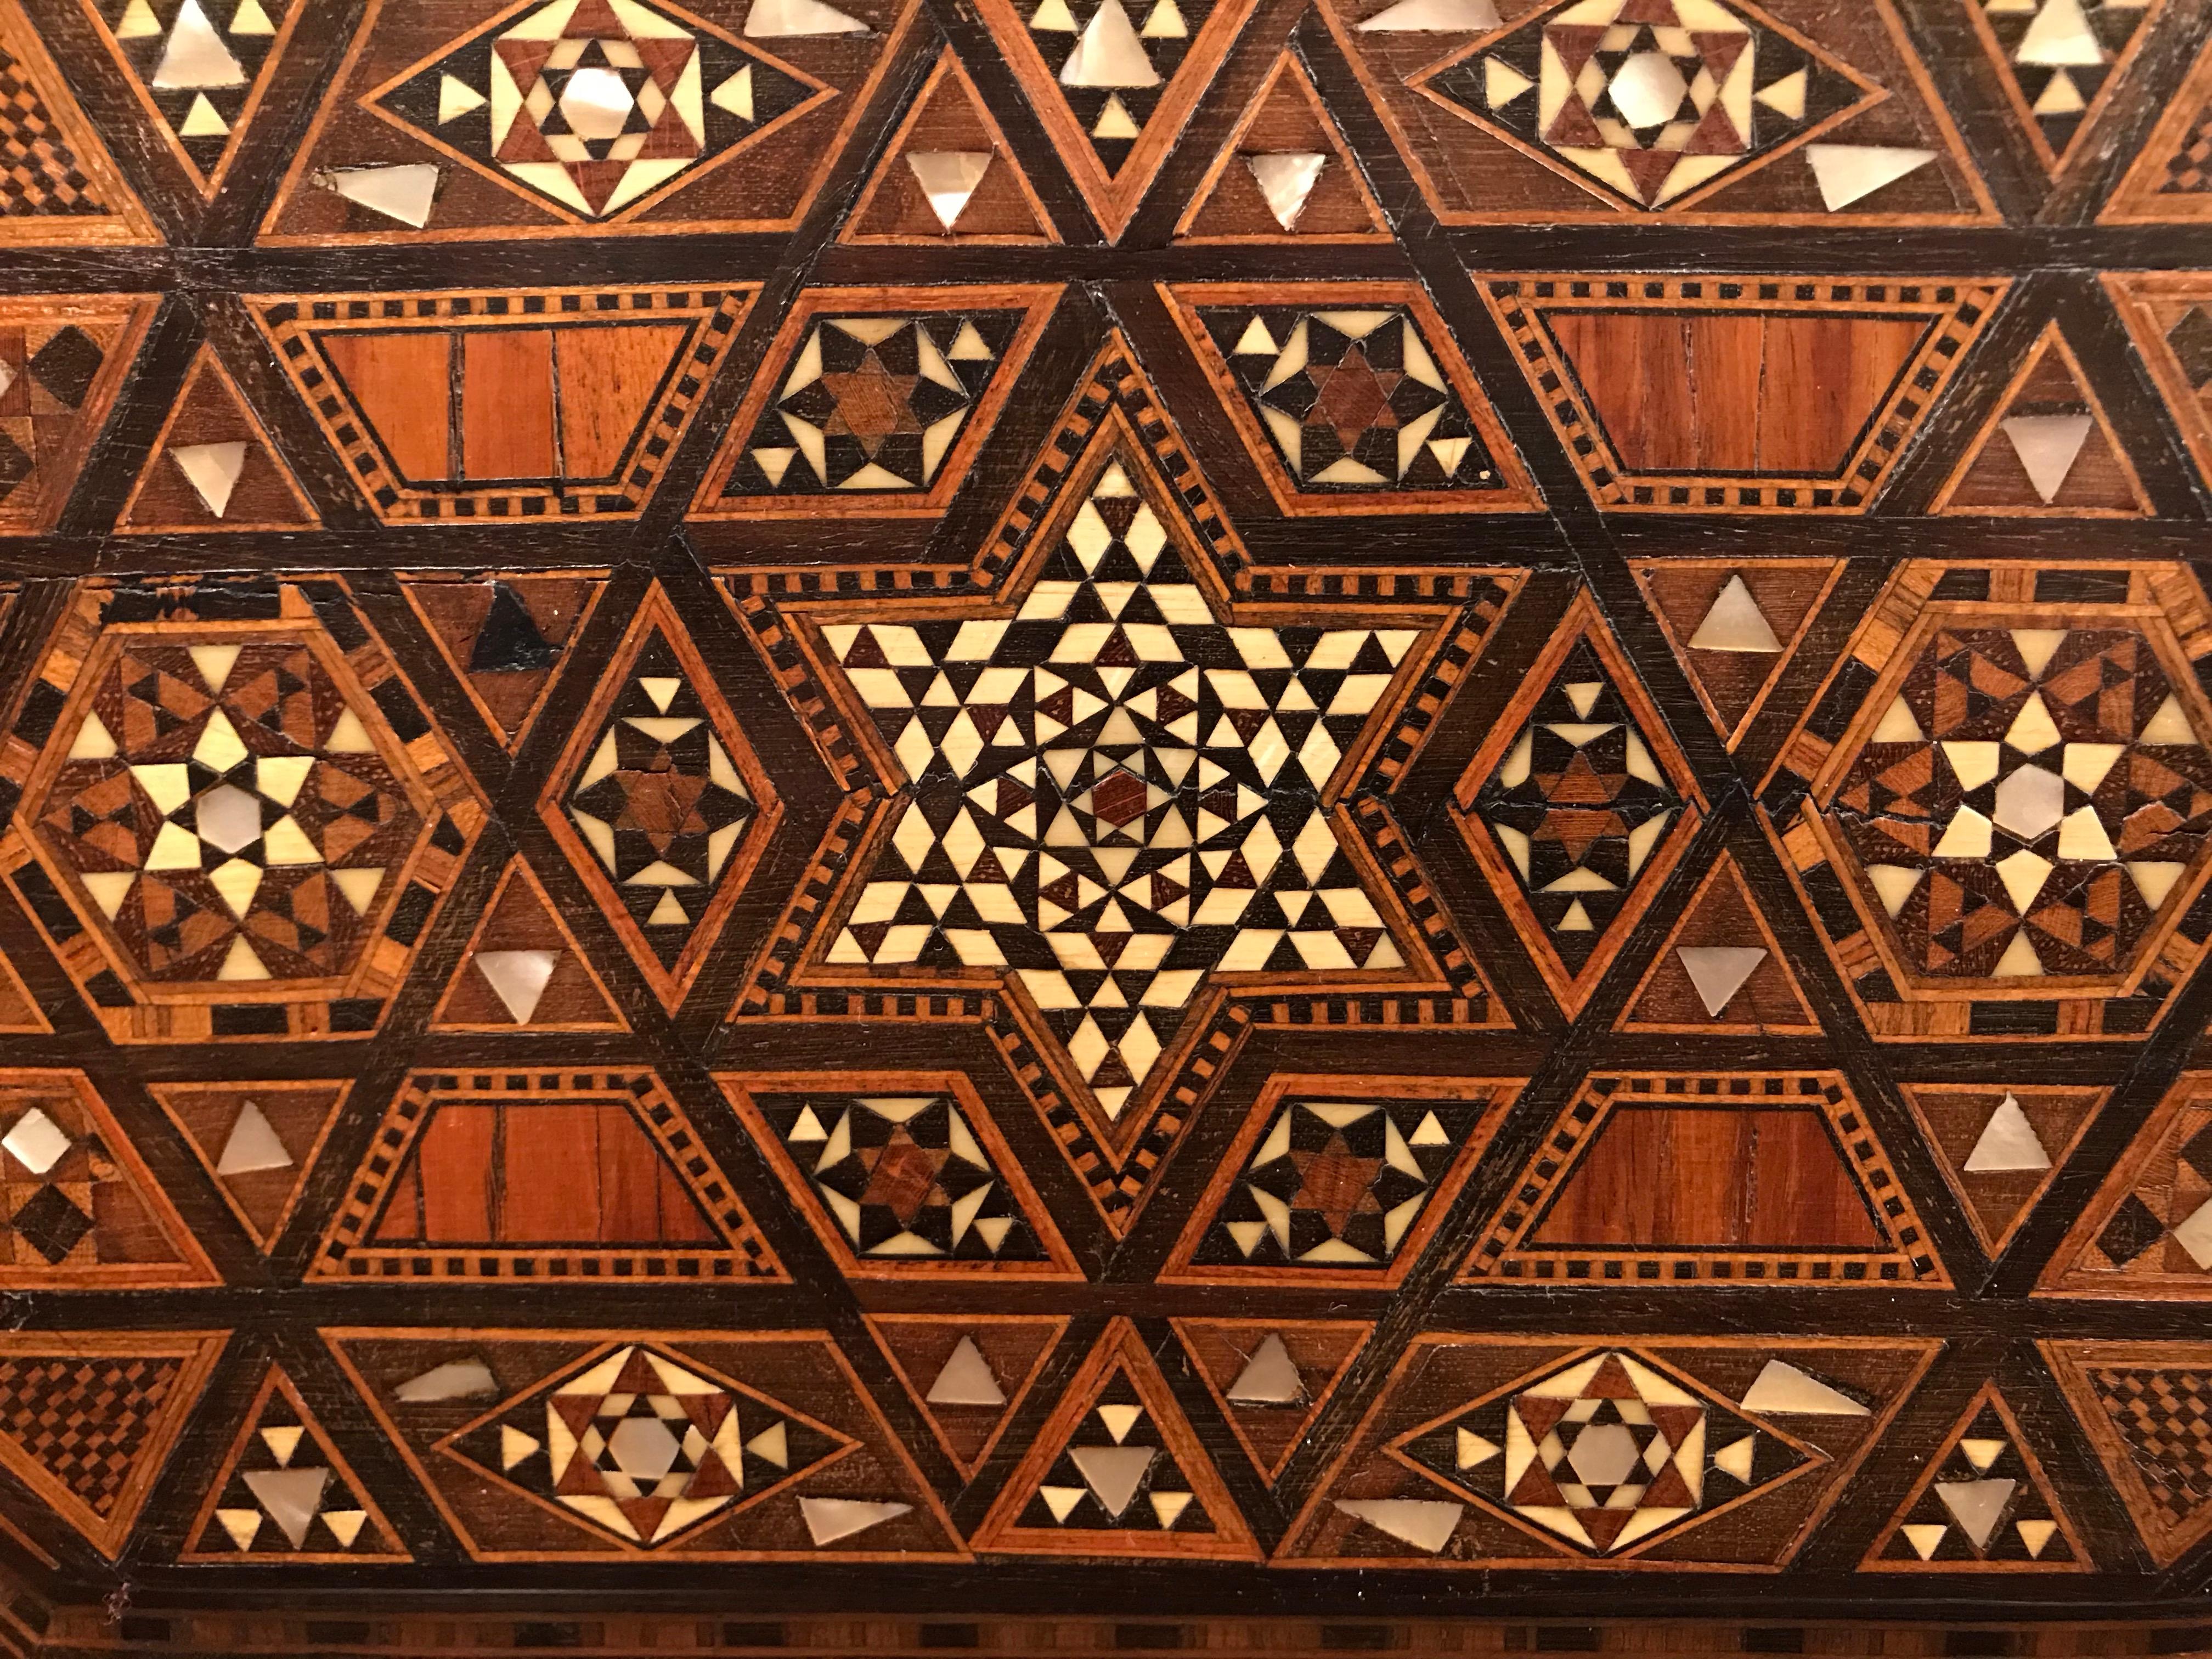 A beautifully designed Moroccan box with the surface completely inlaid with tropical woods, such as rosewood and ebony, polished bone and mother of pearl. I'm always astounded by the intricate workmanship of these boxes. The interior of the lid is